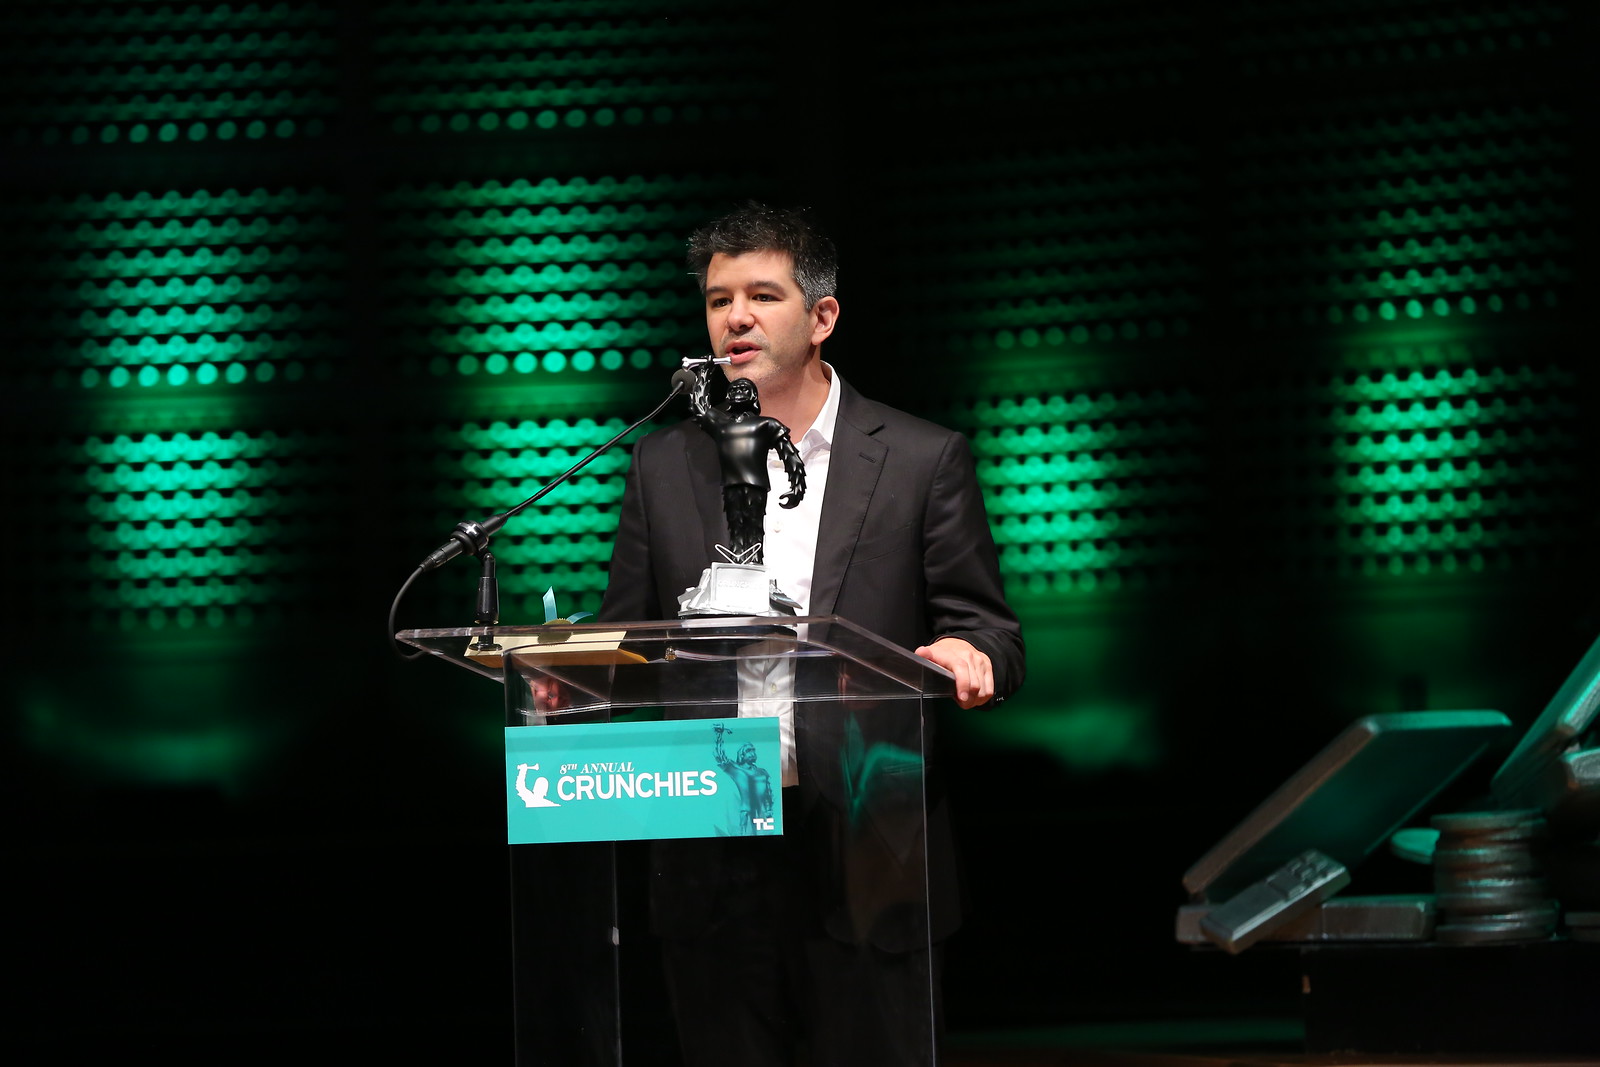 Uber CEO Travis Kalanick accepts the award for Best Overall Startup of 2014.